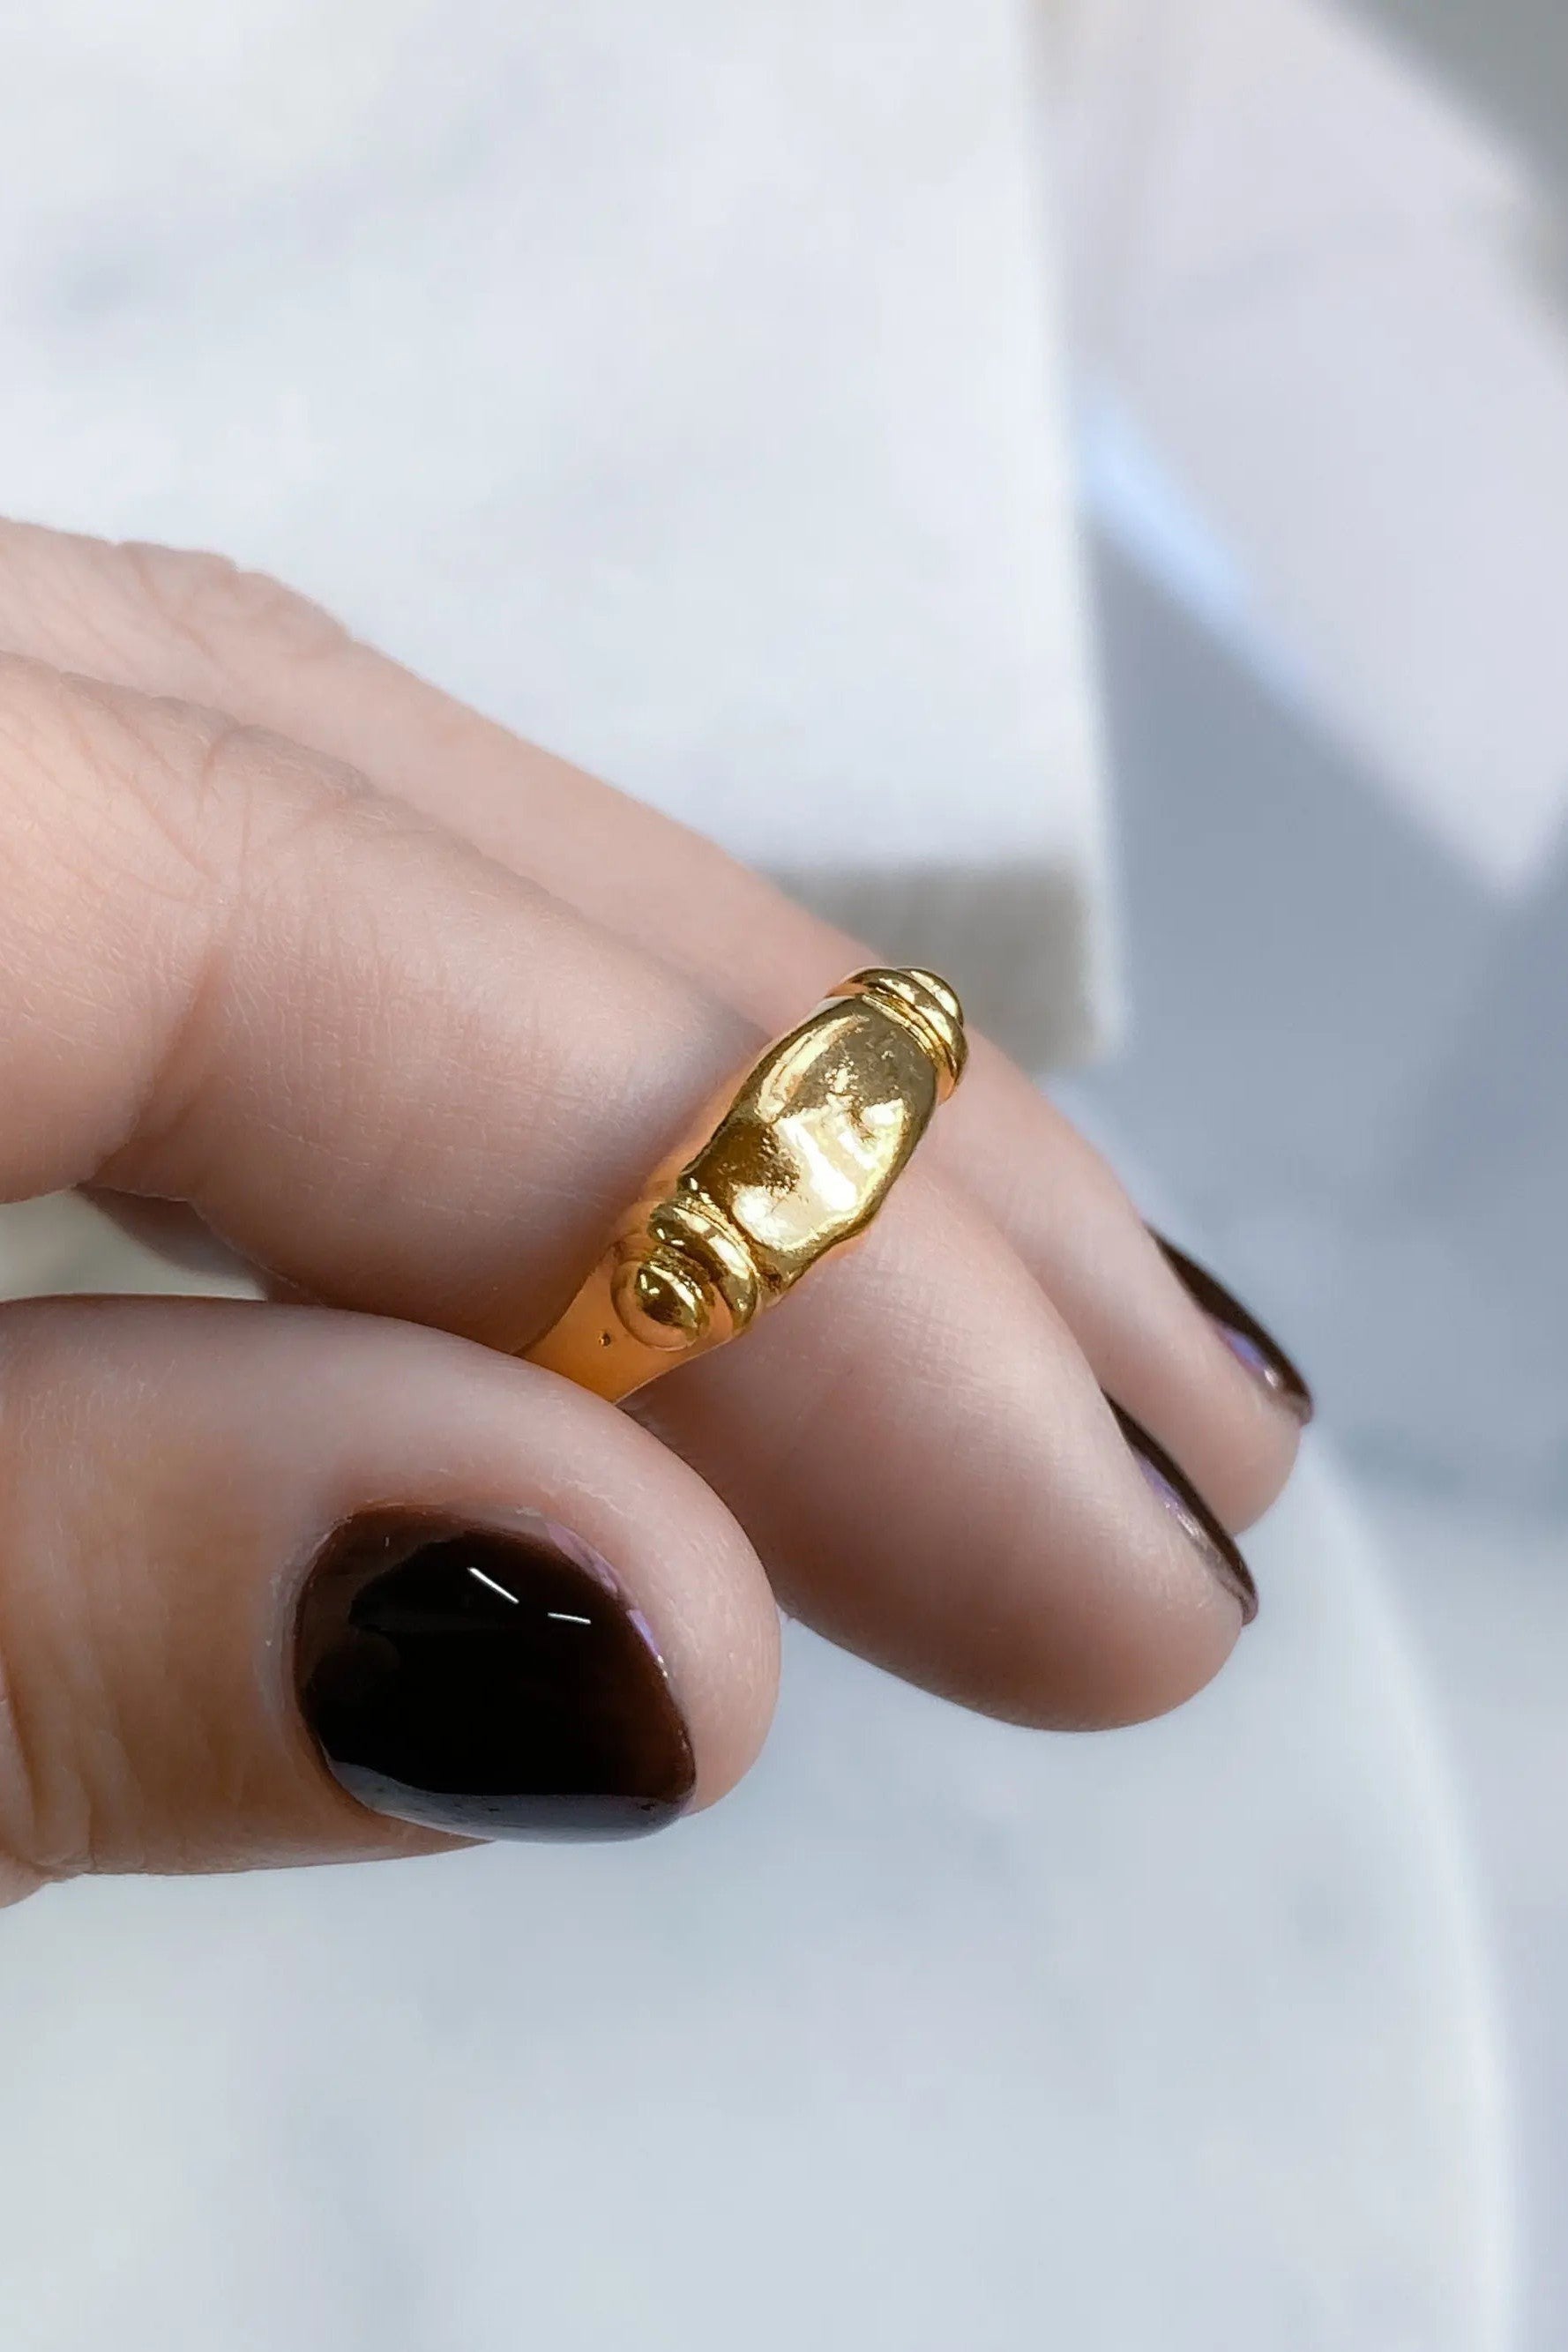 Ancient Greek ring, ethnic boho ring, Gold adjustable ring, Dainty ring, Gold plated ring for women, Tribal jewelry, St Valentine gift